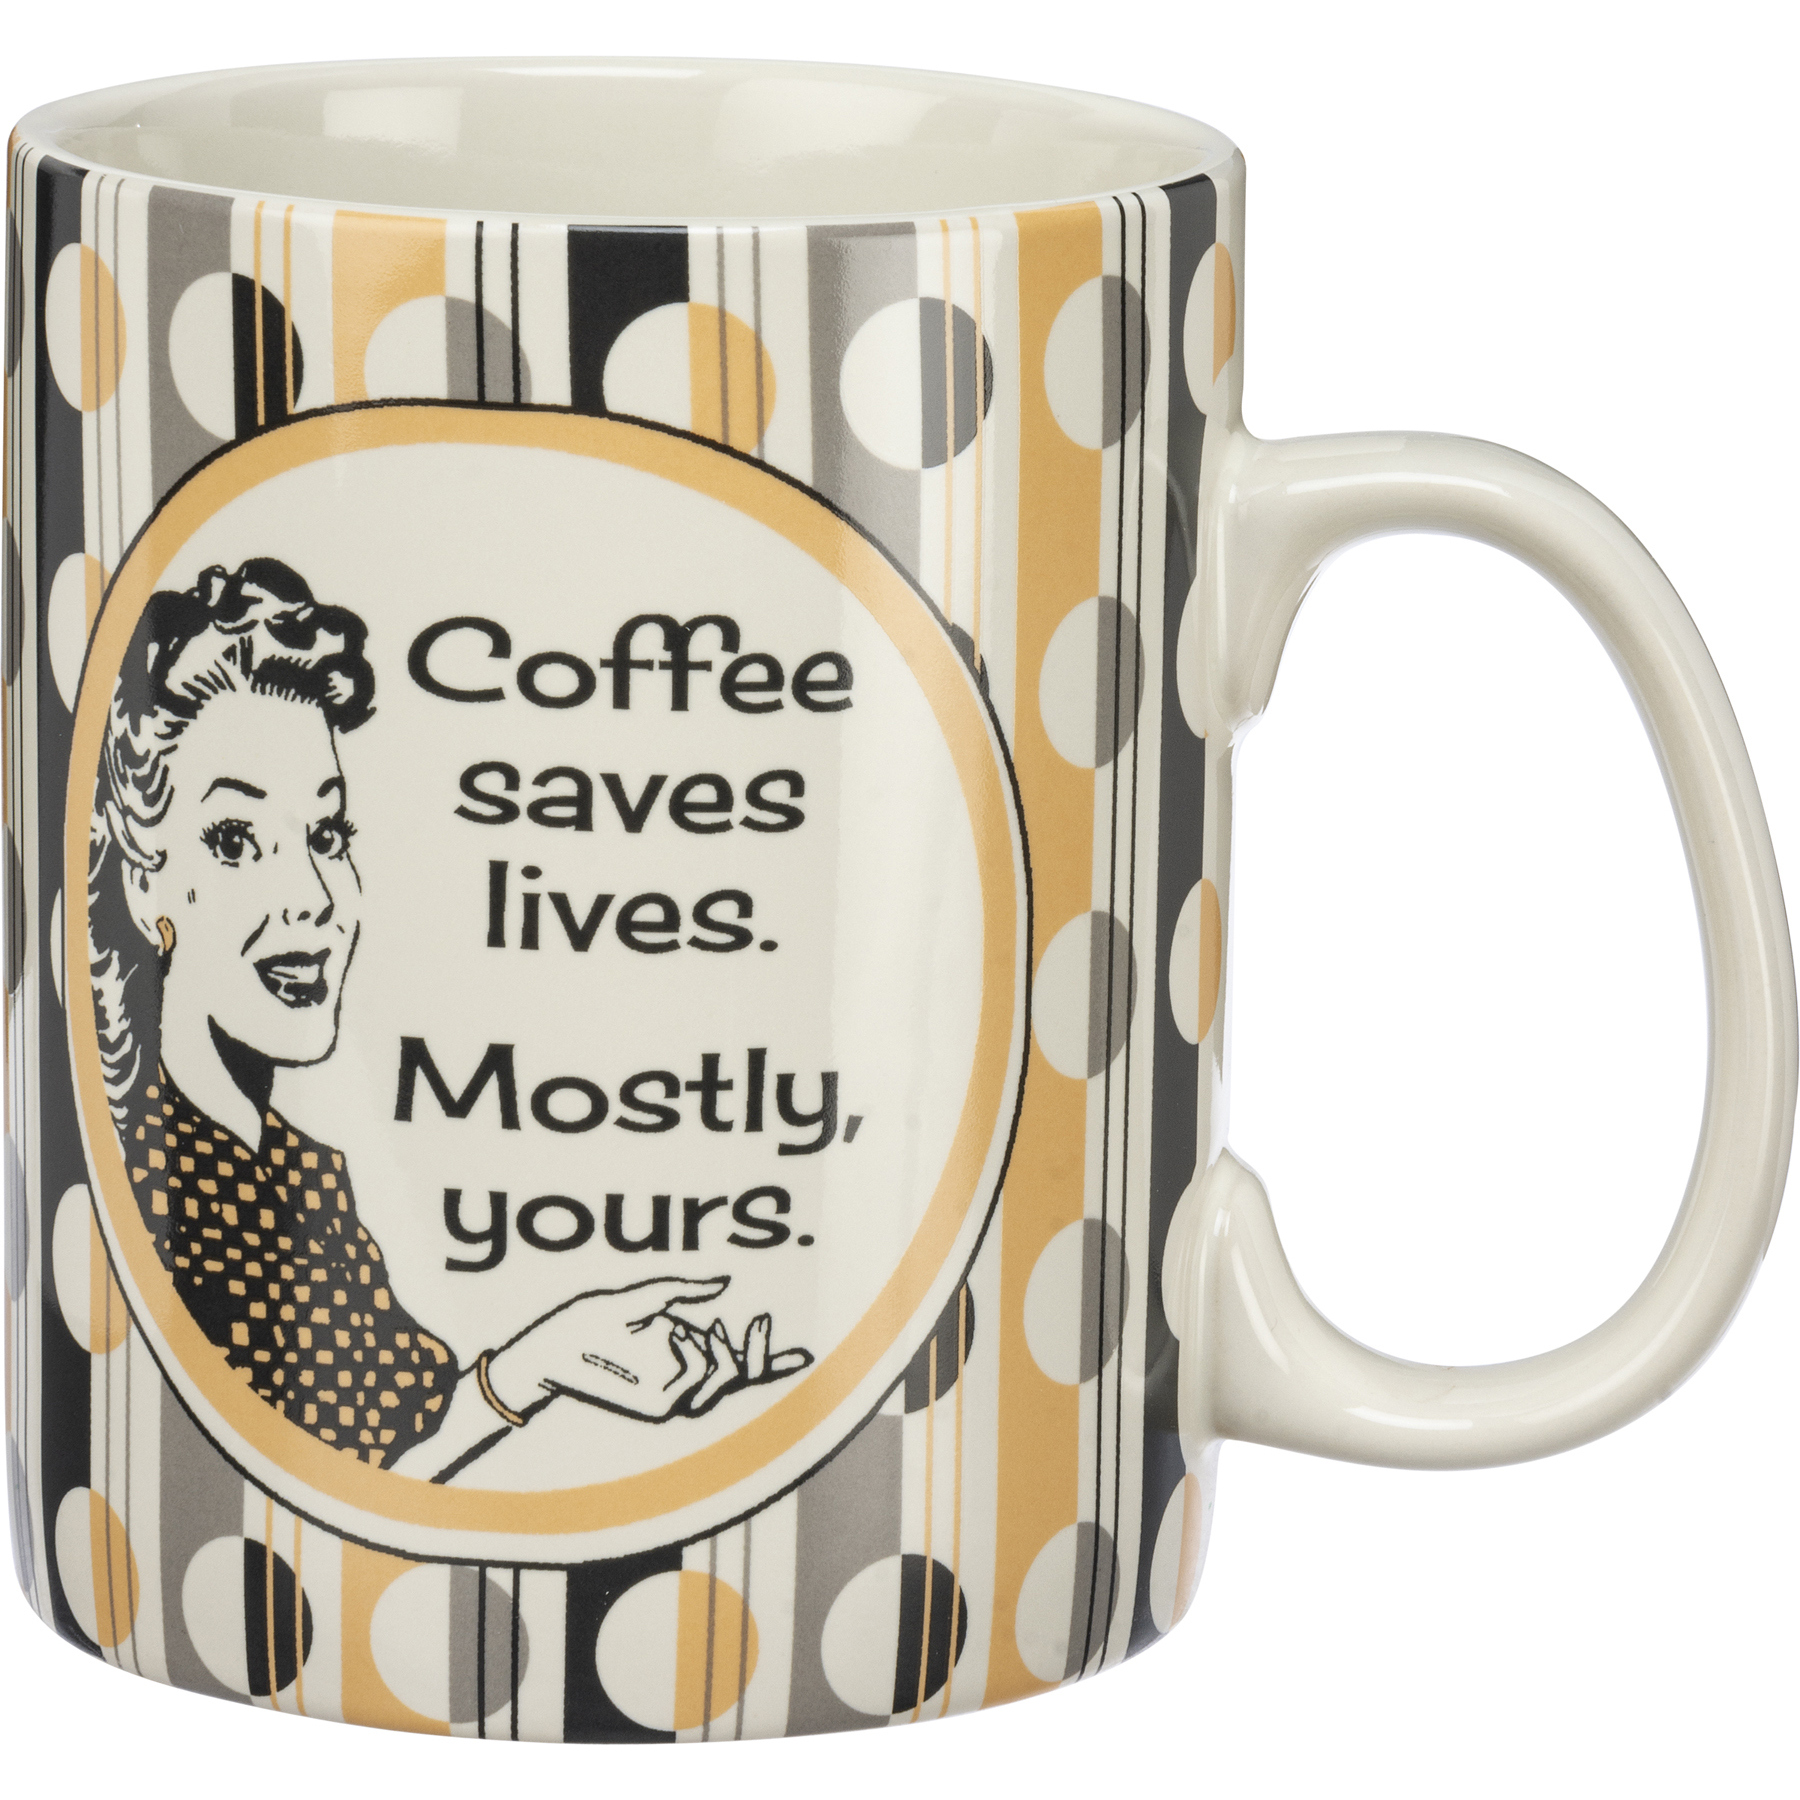 Download Mug Coffee Saves Lives Mostly Yours Room By Room Collection Primitives By Kathy